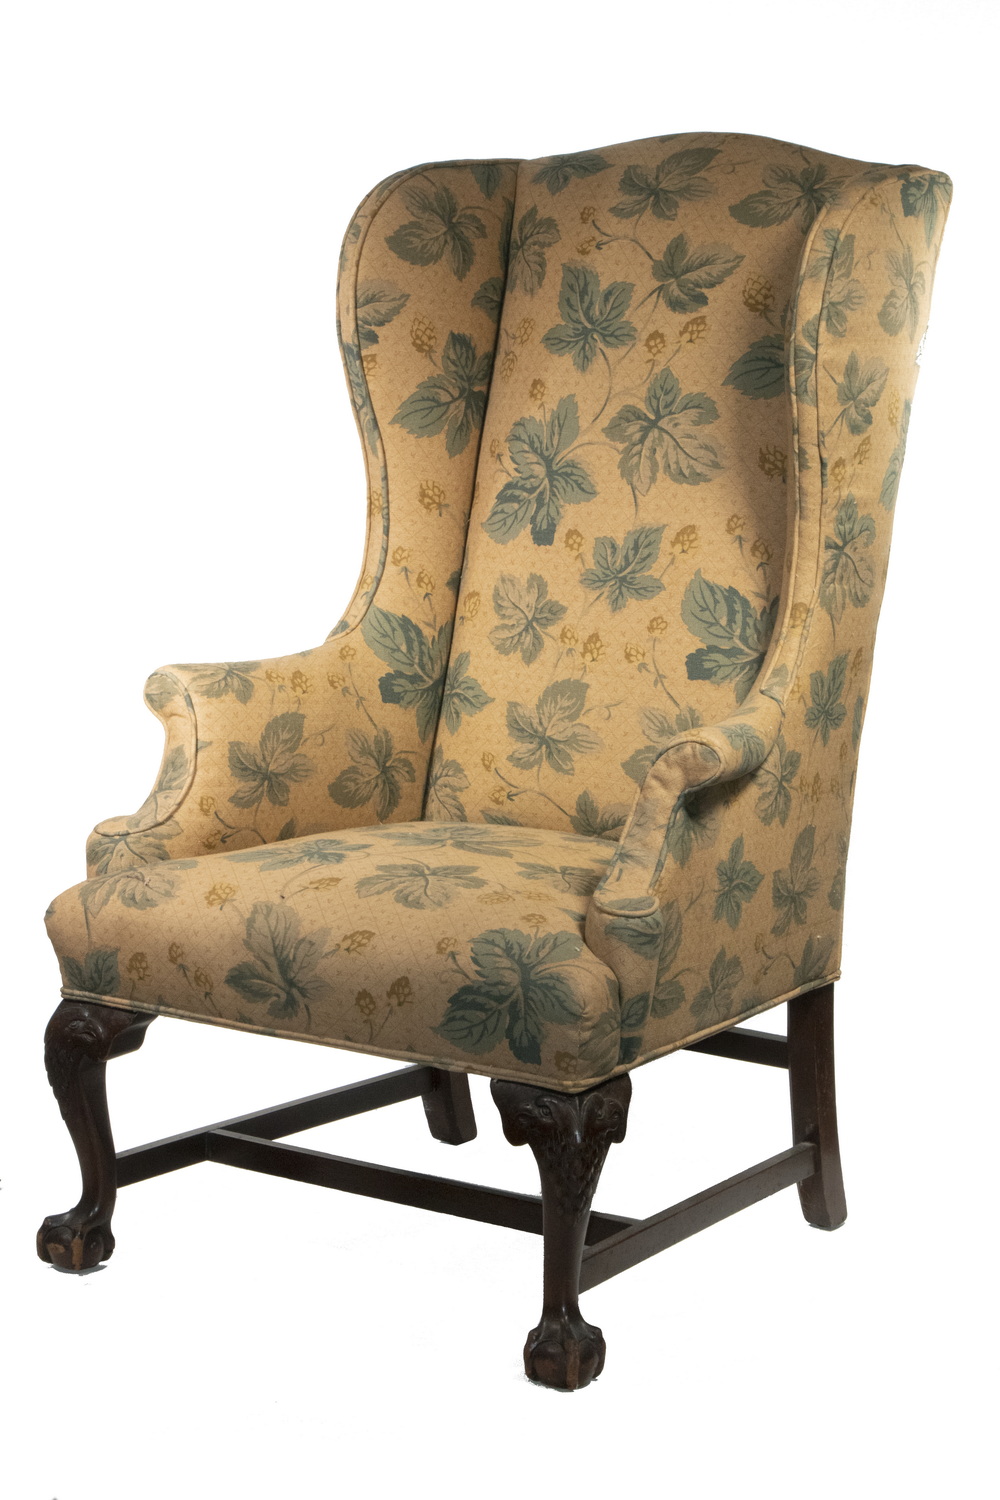 CUSTOM MAHOGANY WING CHAIR Chippendale 2b3a30